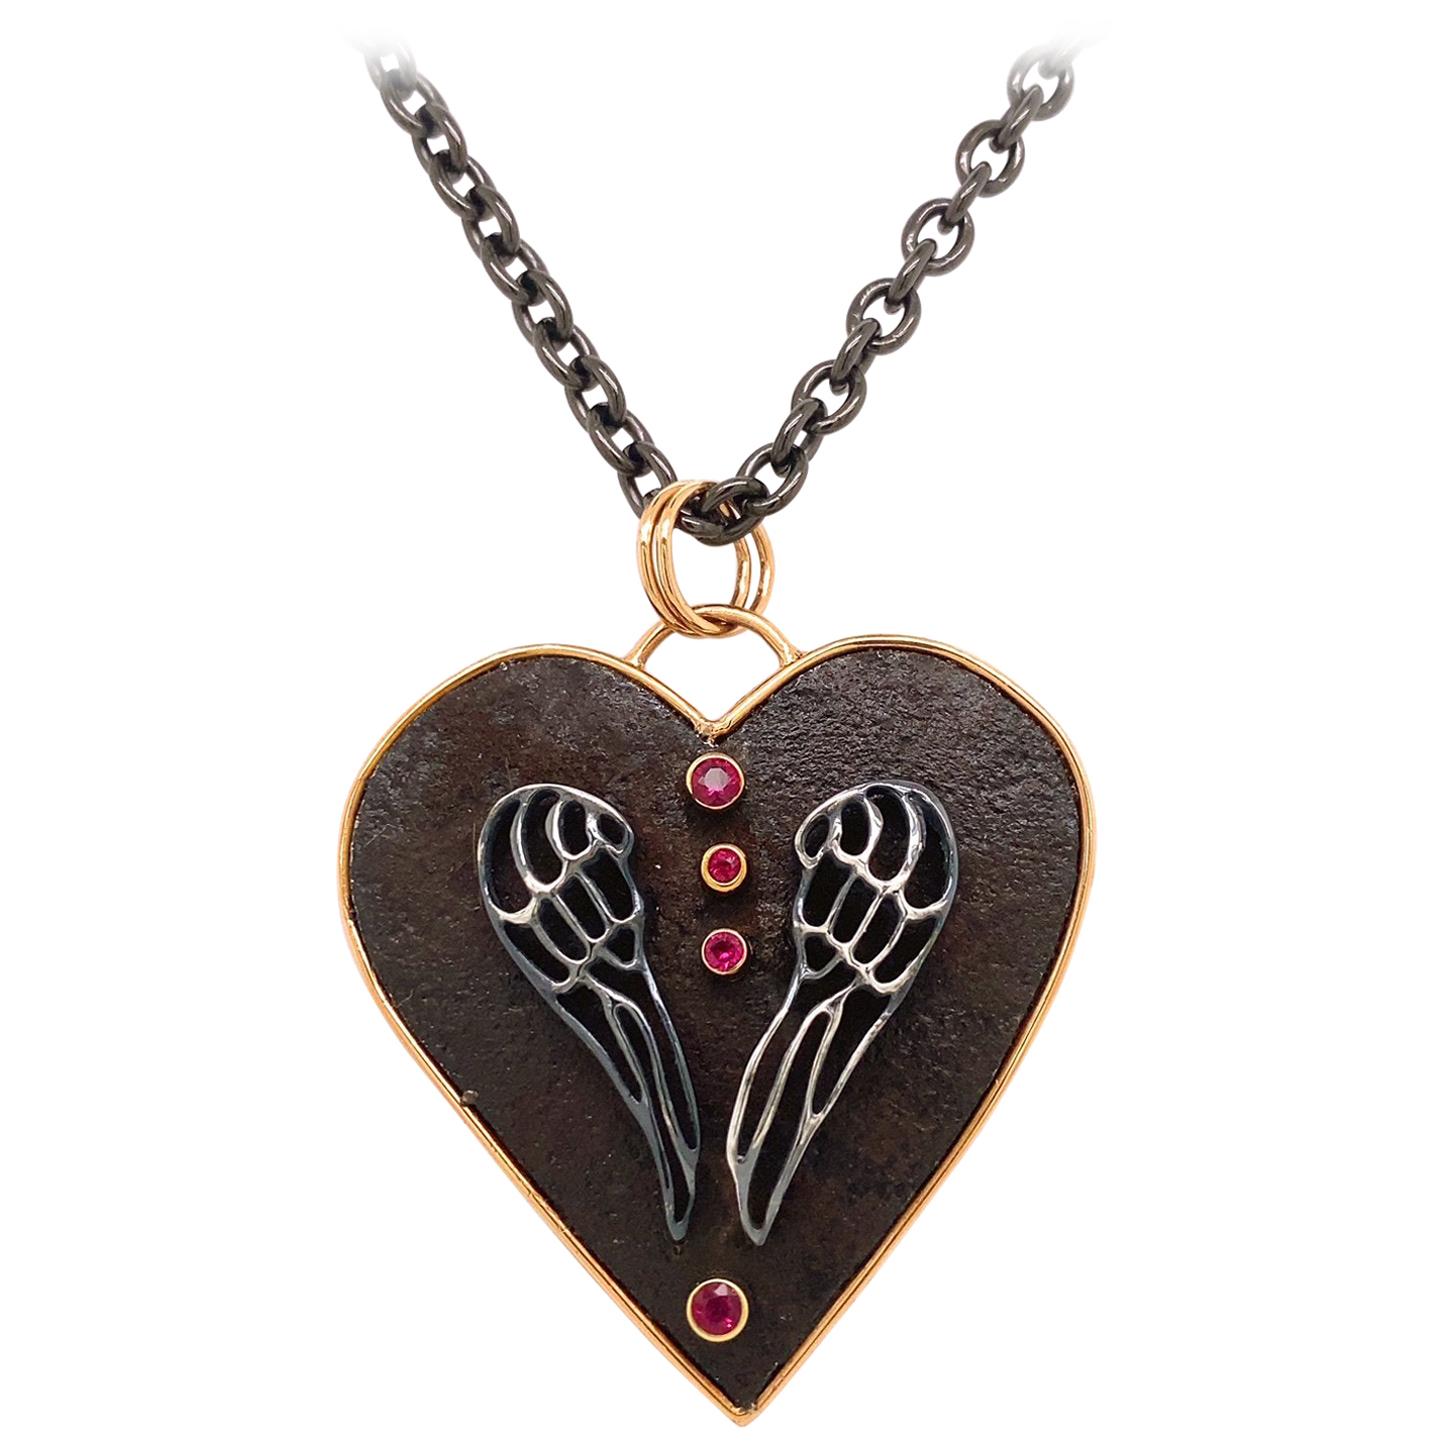 18 Karat Rose Gold, Sterling Silver, and Rusted Iron Heart Necklace with Rubies